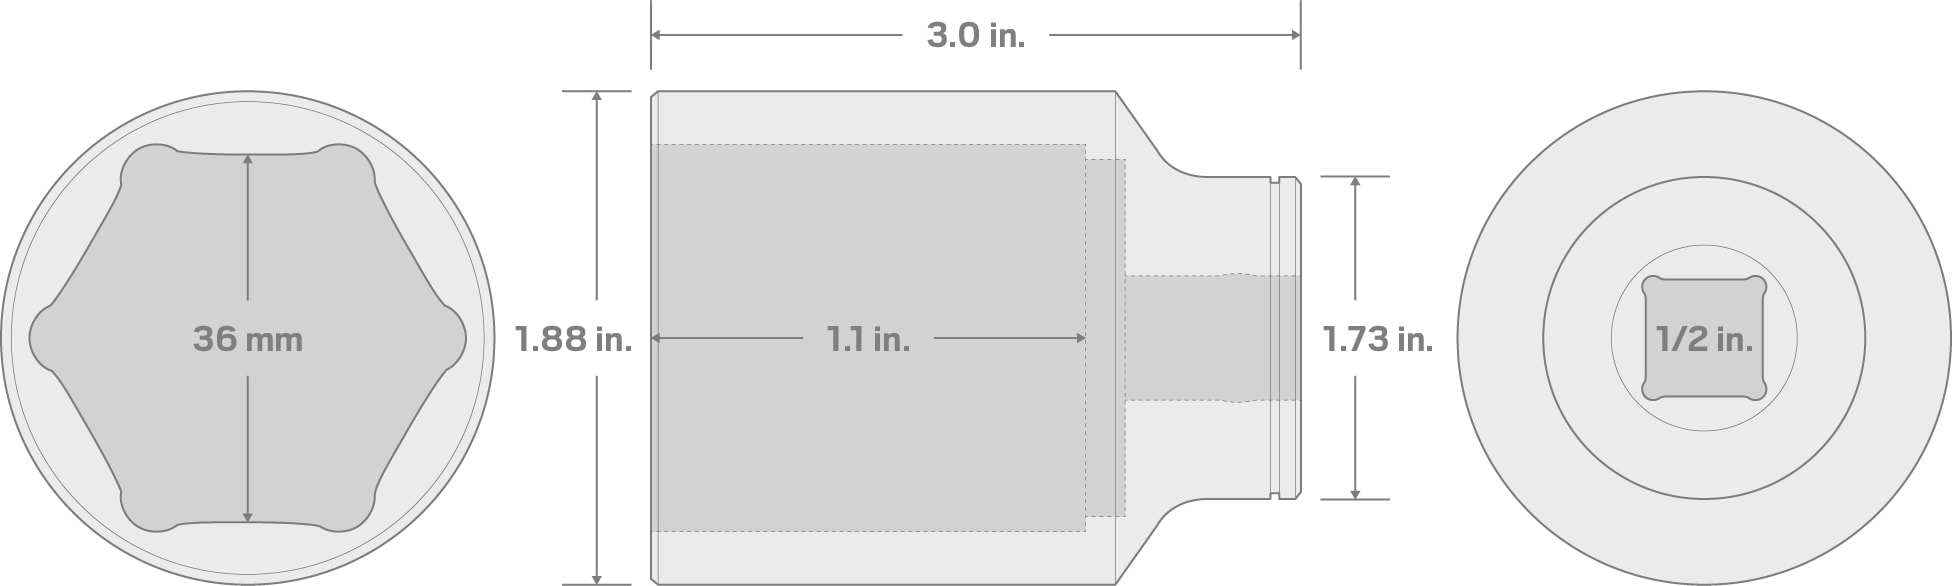 Specs for 1/2 Inch Drive x 36 mm Deep 6-Point Socket